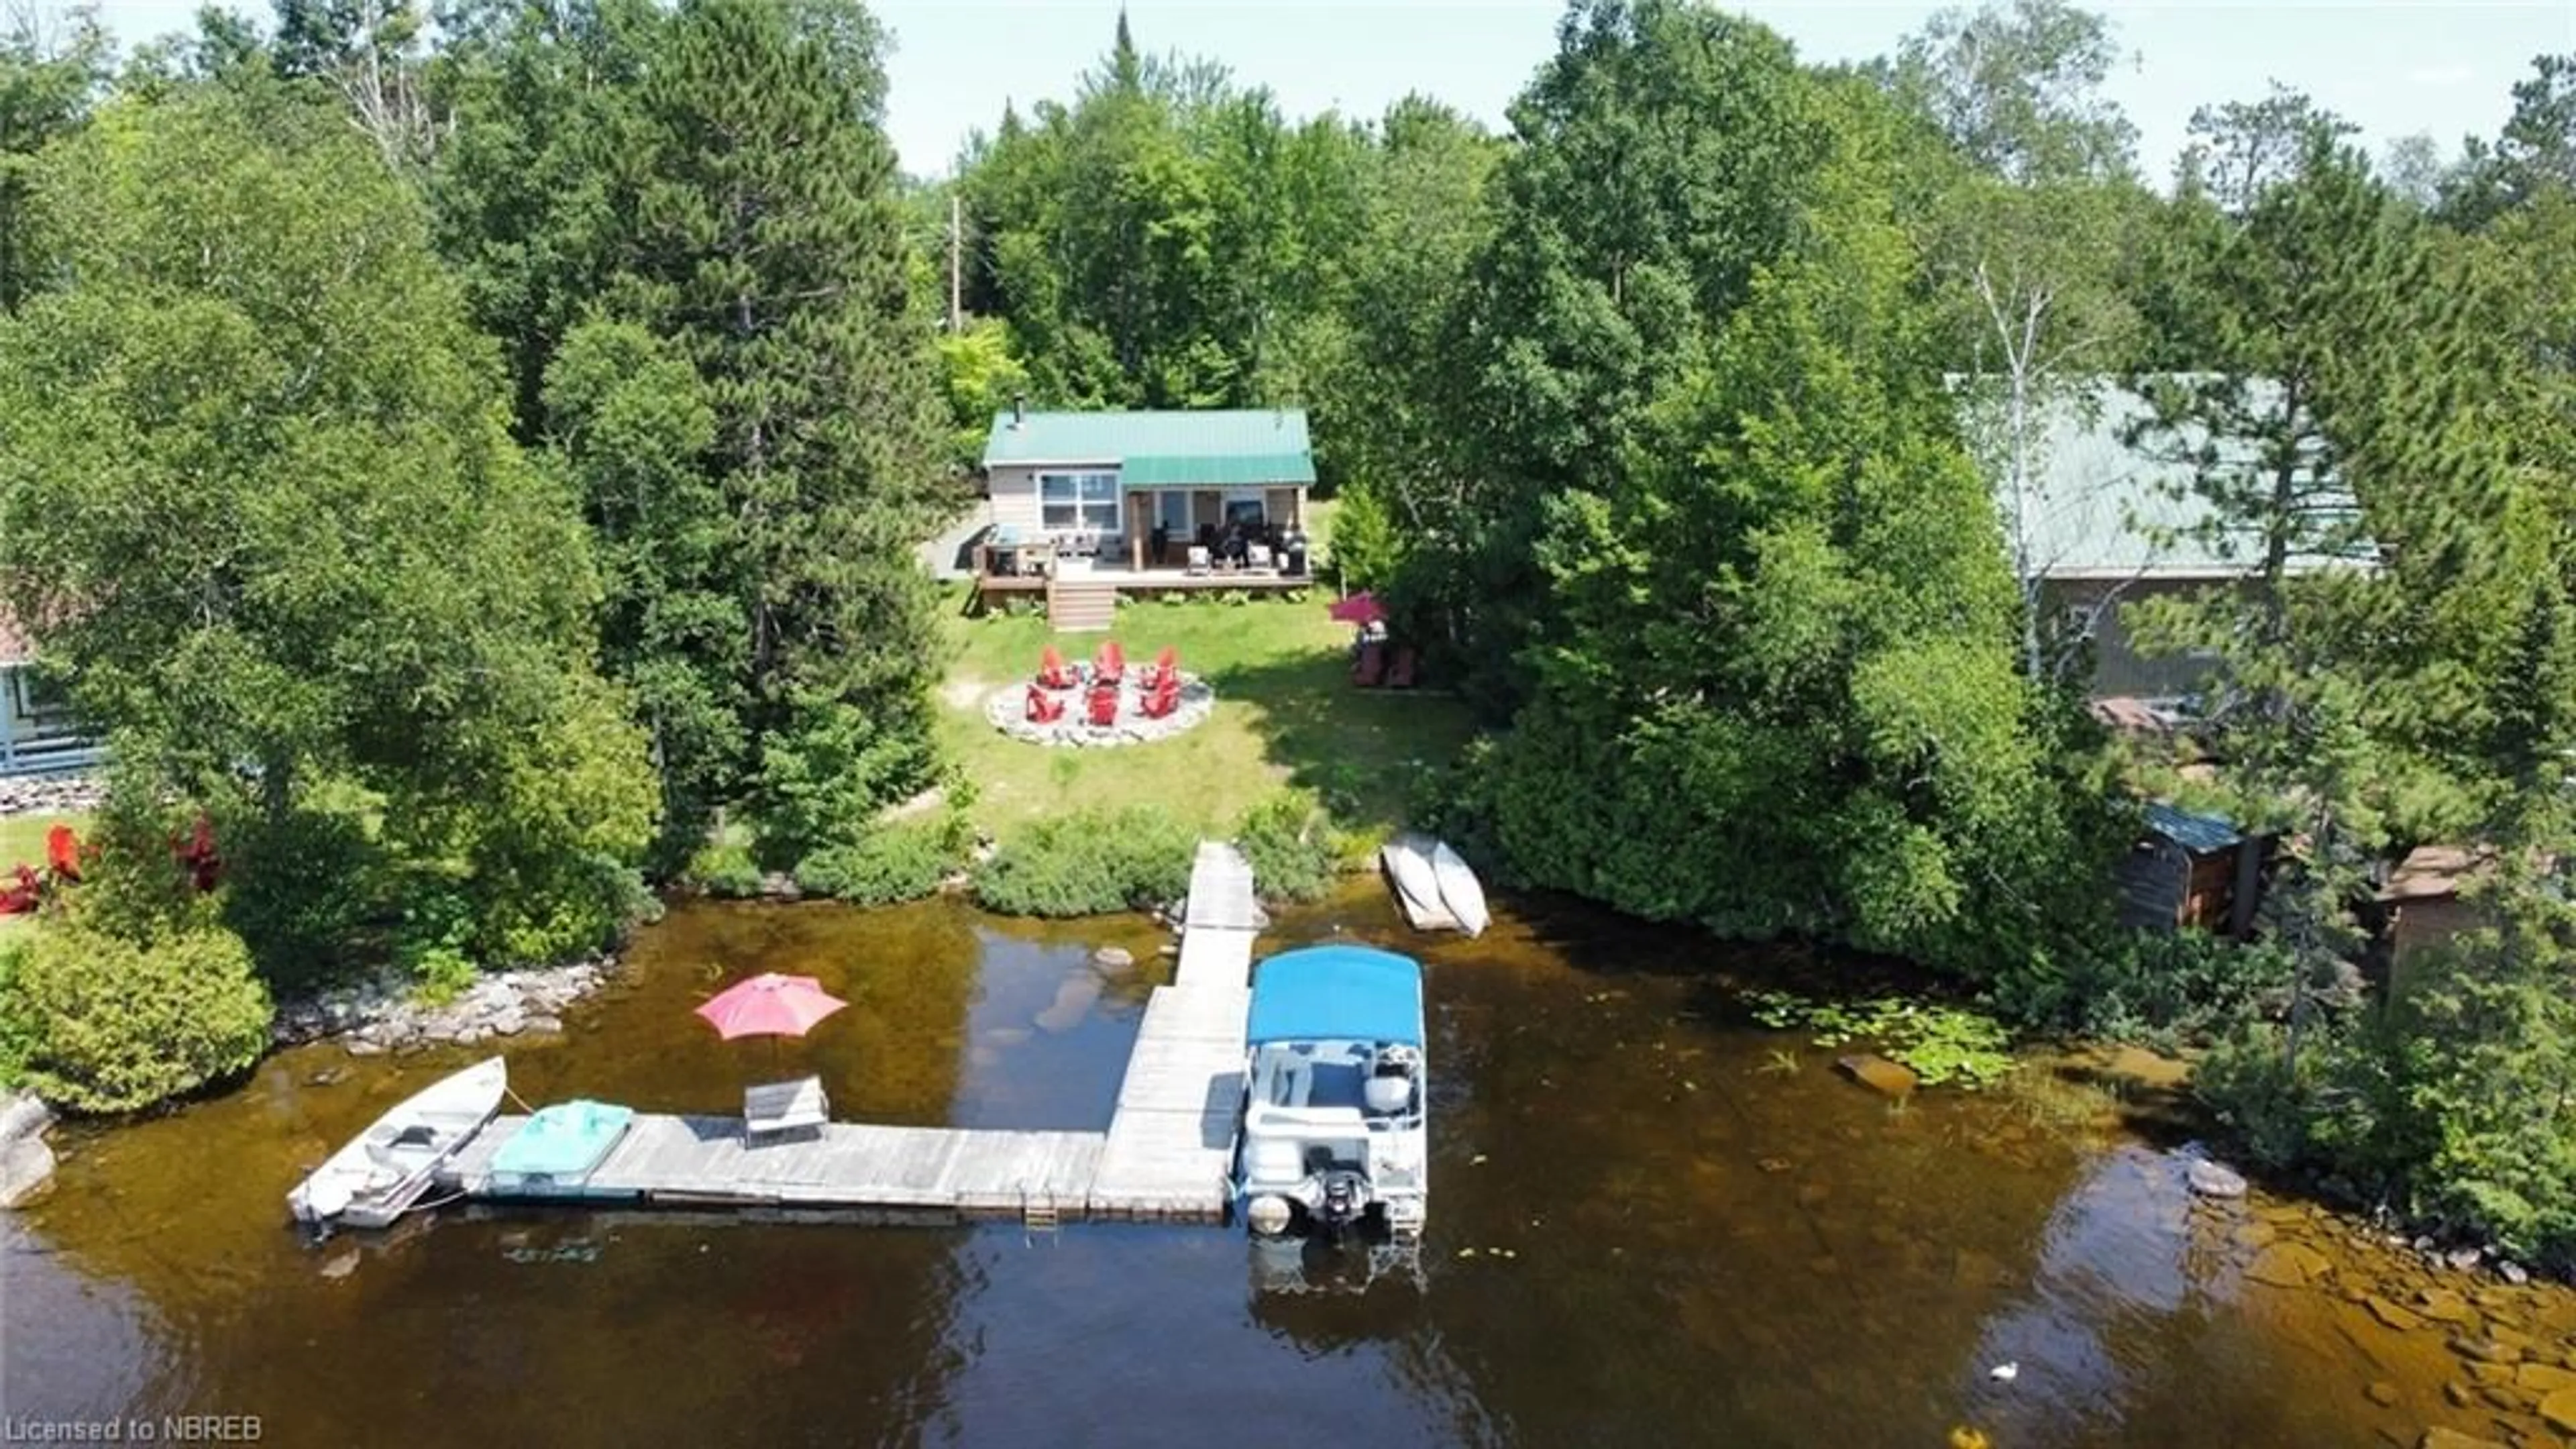 Cottage for 382A Danis Rd, Crystal Falls Ontario P0H 1L0